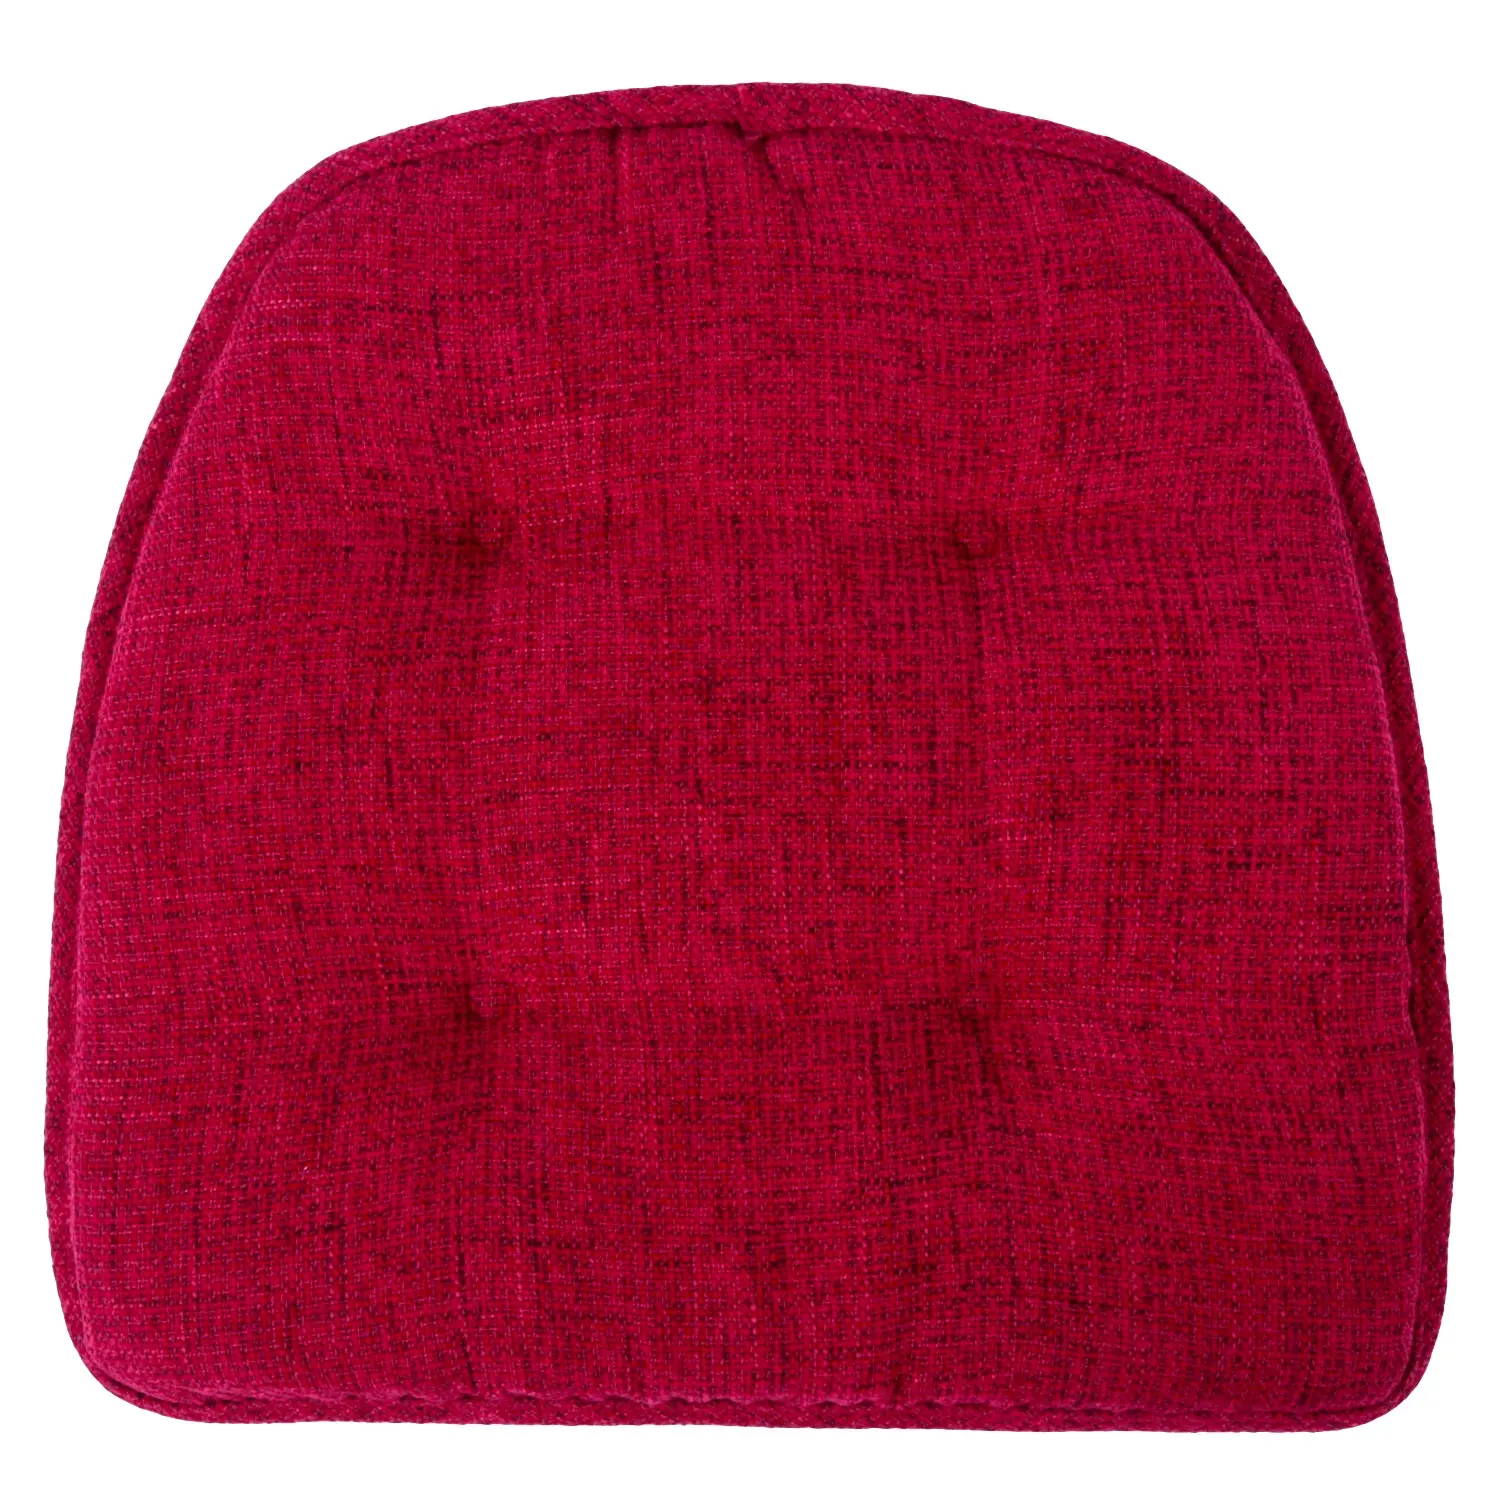 Super Soft 100% Polyester Square Seat Cushion For Stadium Seat Pad